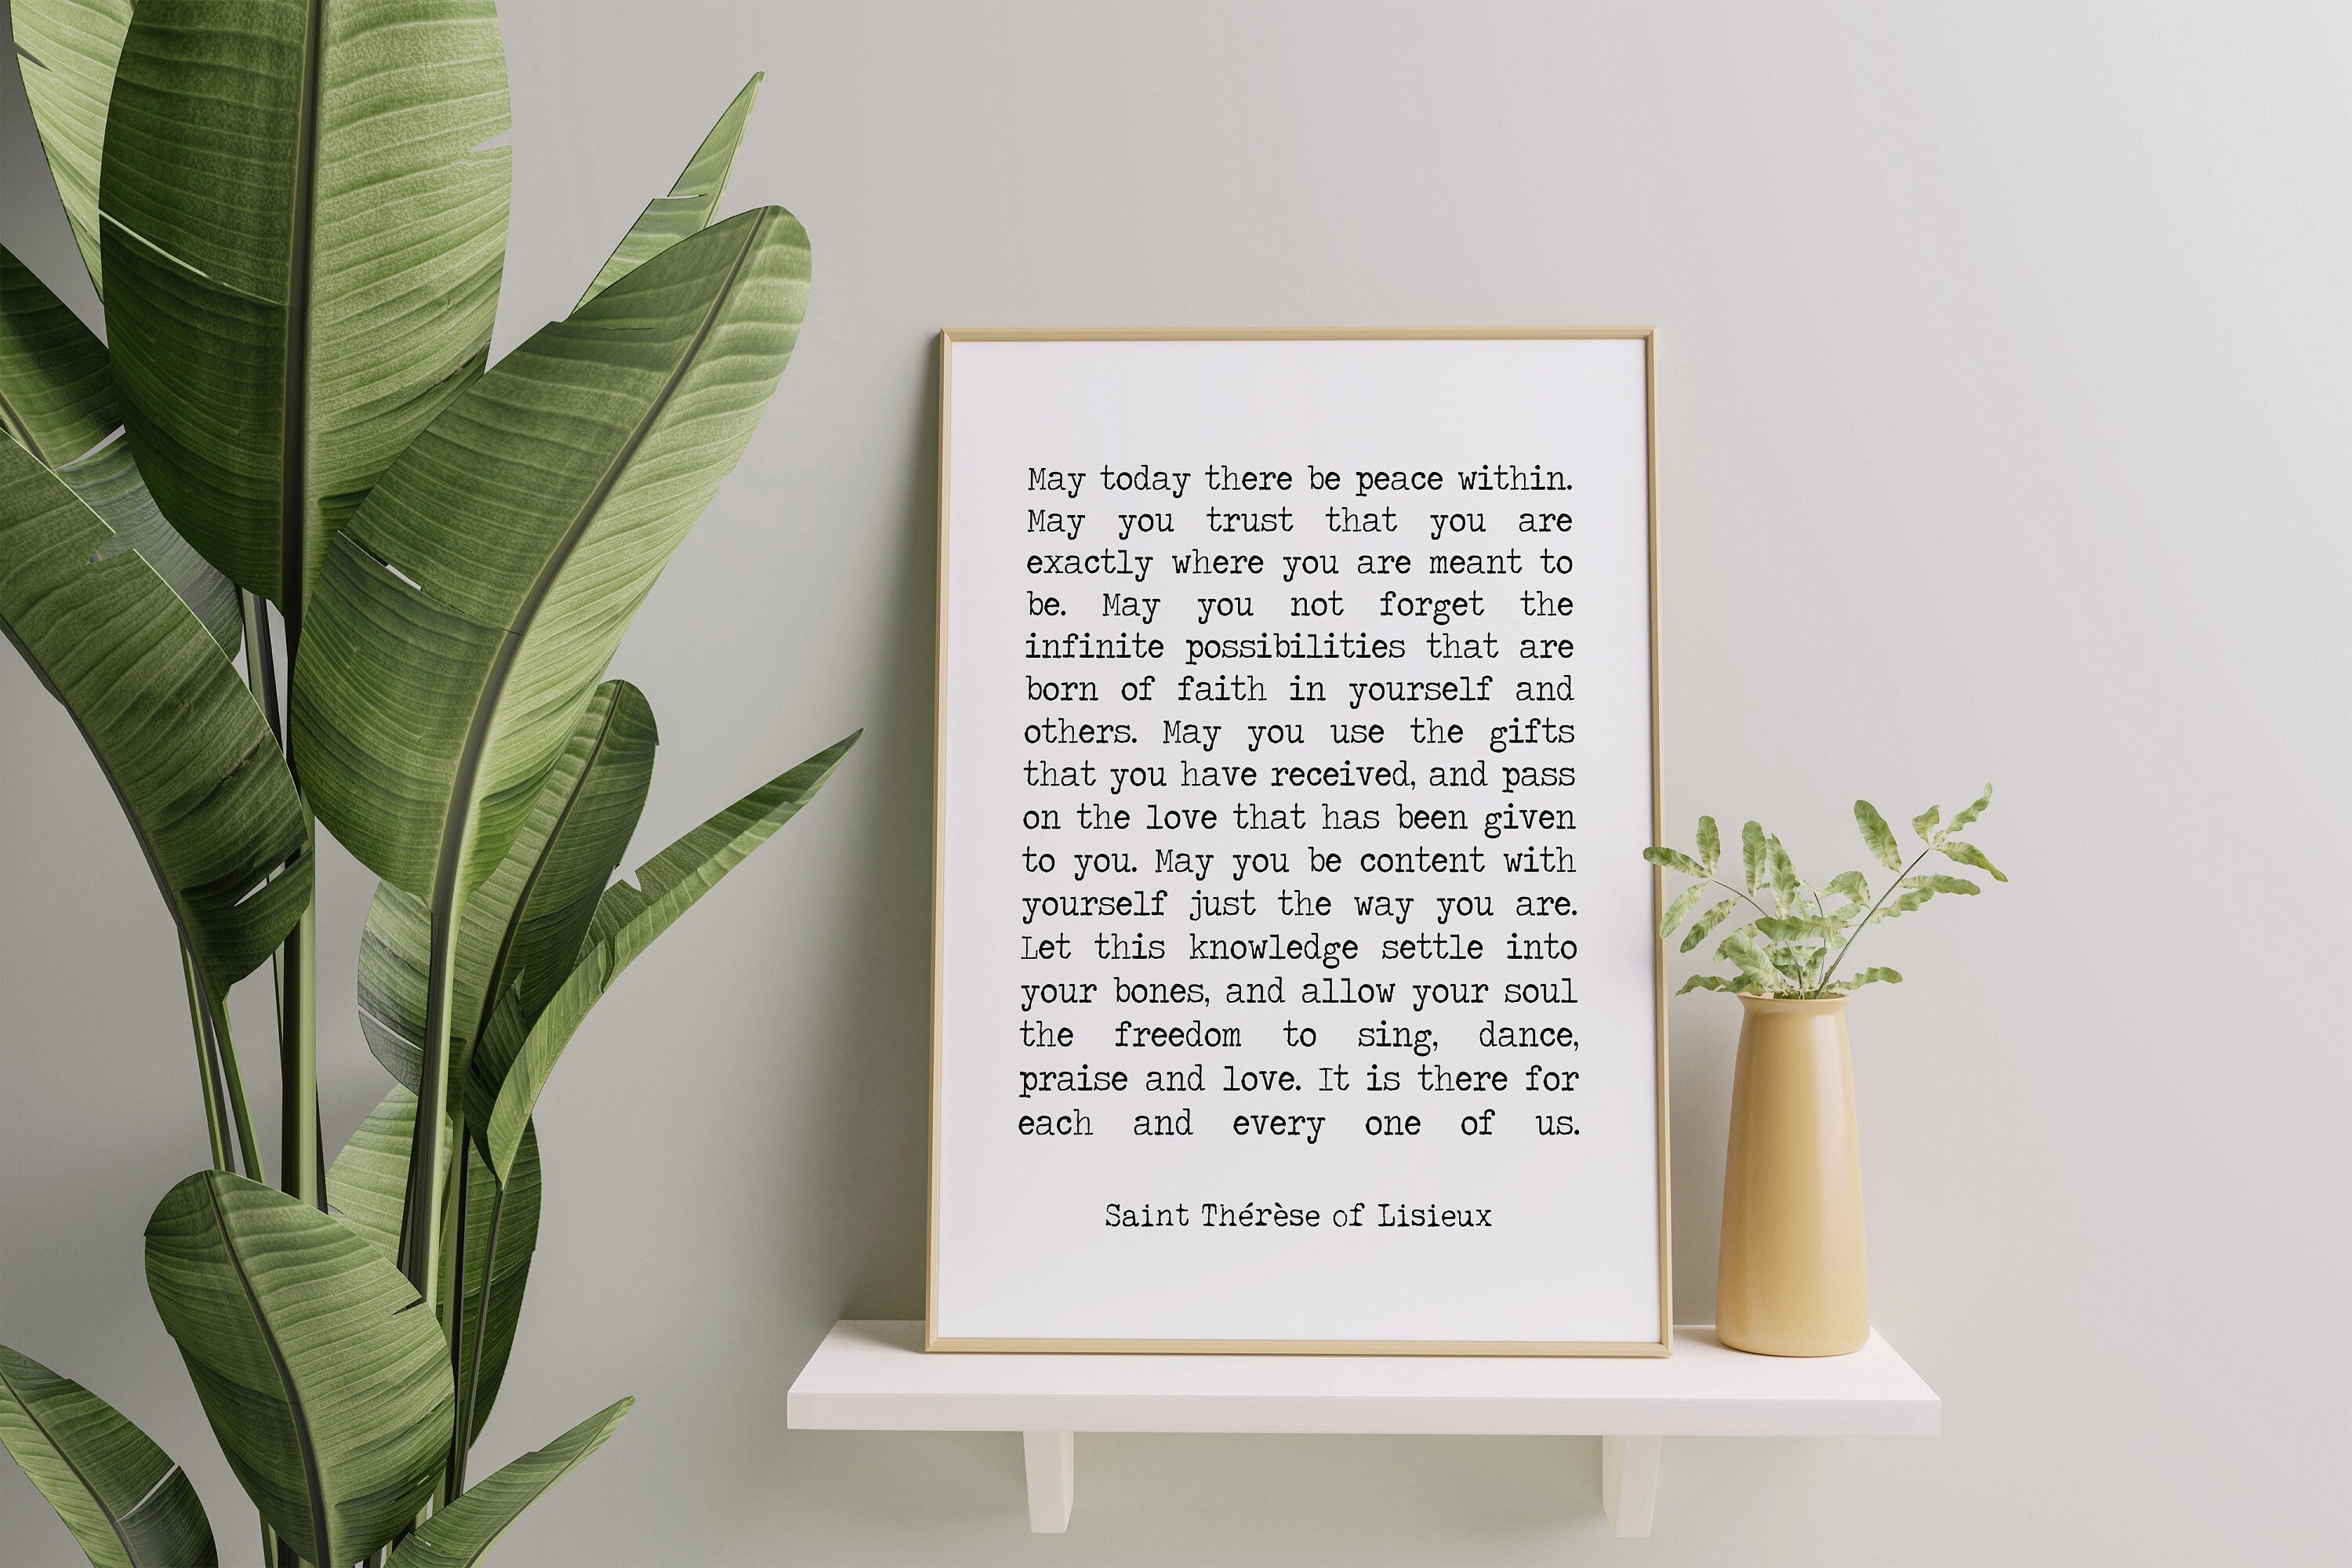 St Therese of Lisieux Peace Quote Print in Black & White, May Today There Be Peace Within Unframed Framed Inspirational Quote Wall Art Print